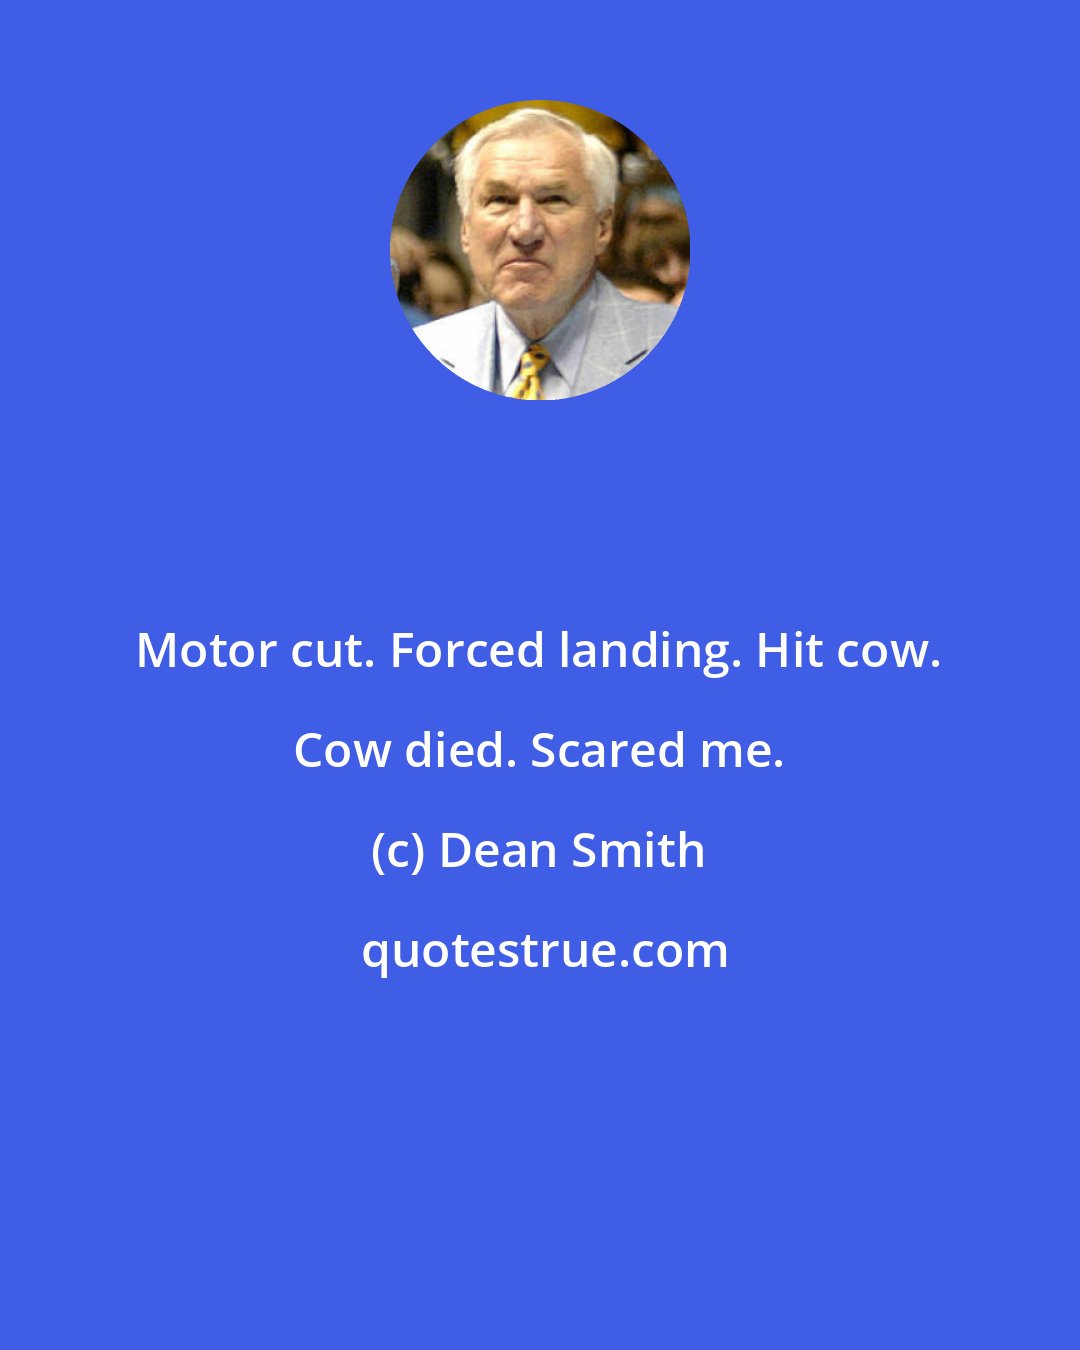 Dean Smith: Motor cut. Forced landing. Hit cow. Cow died. Scared me.